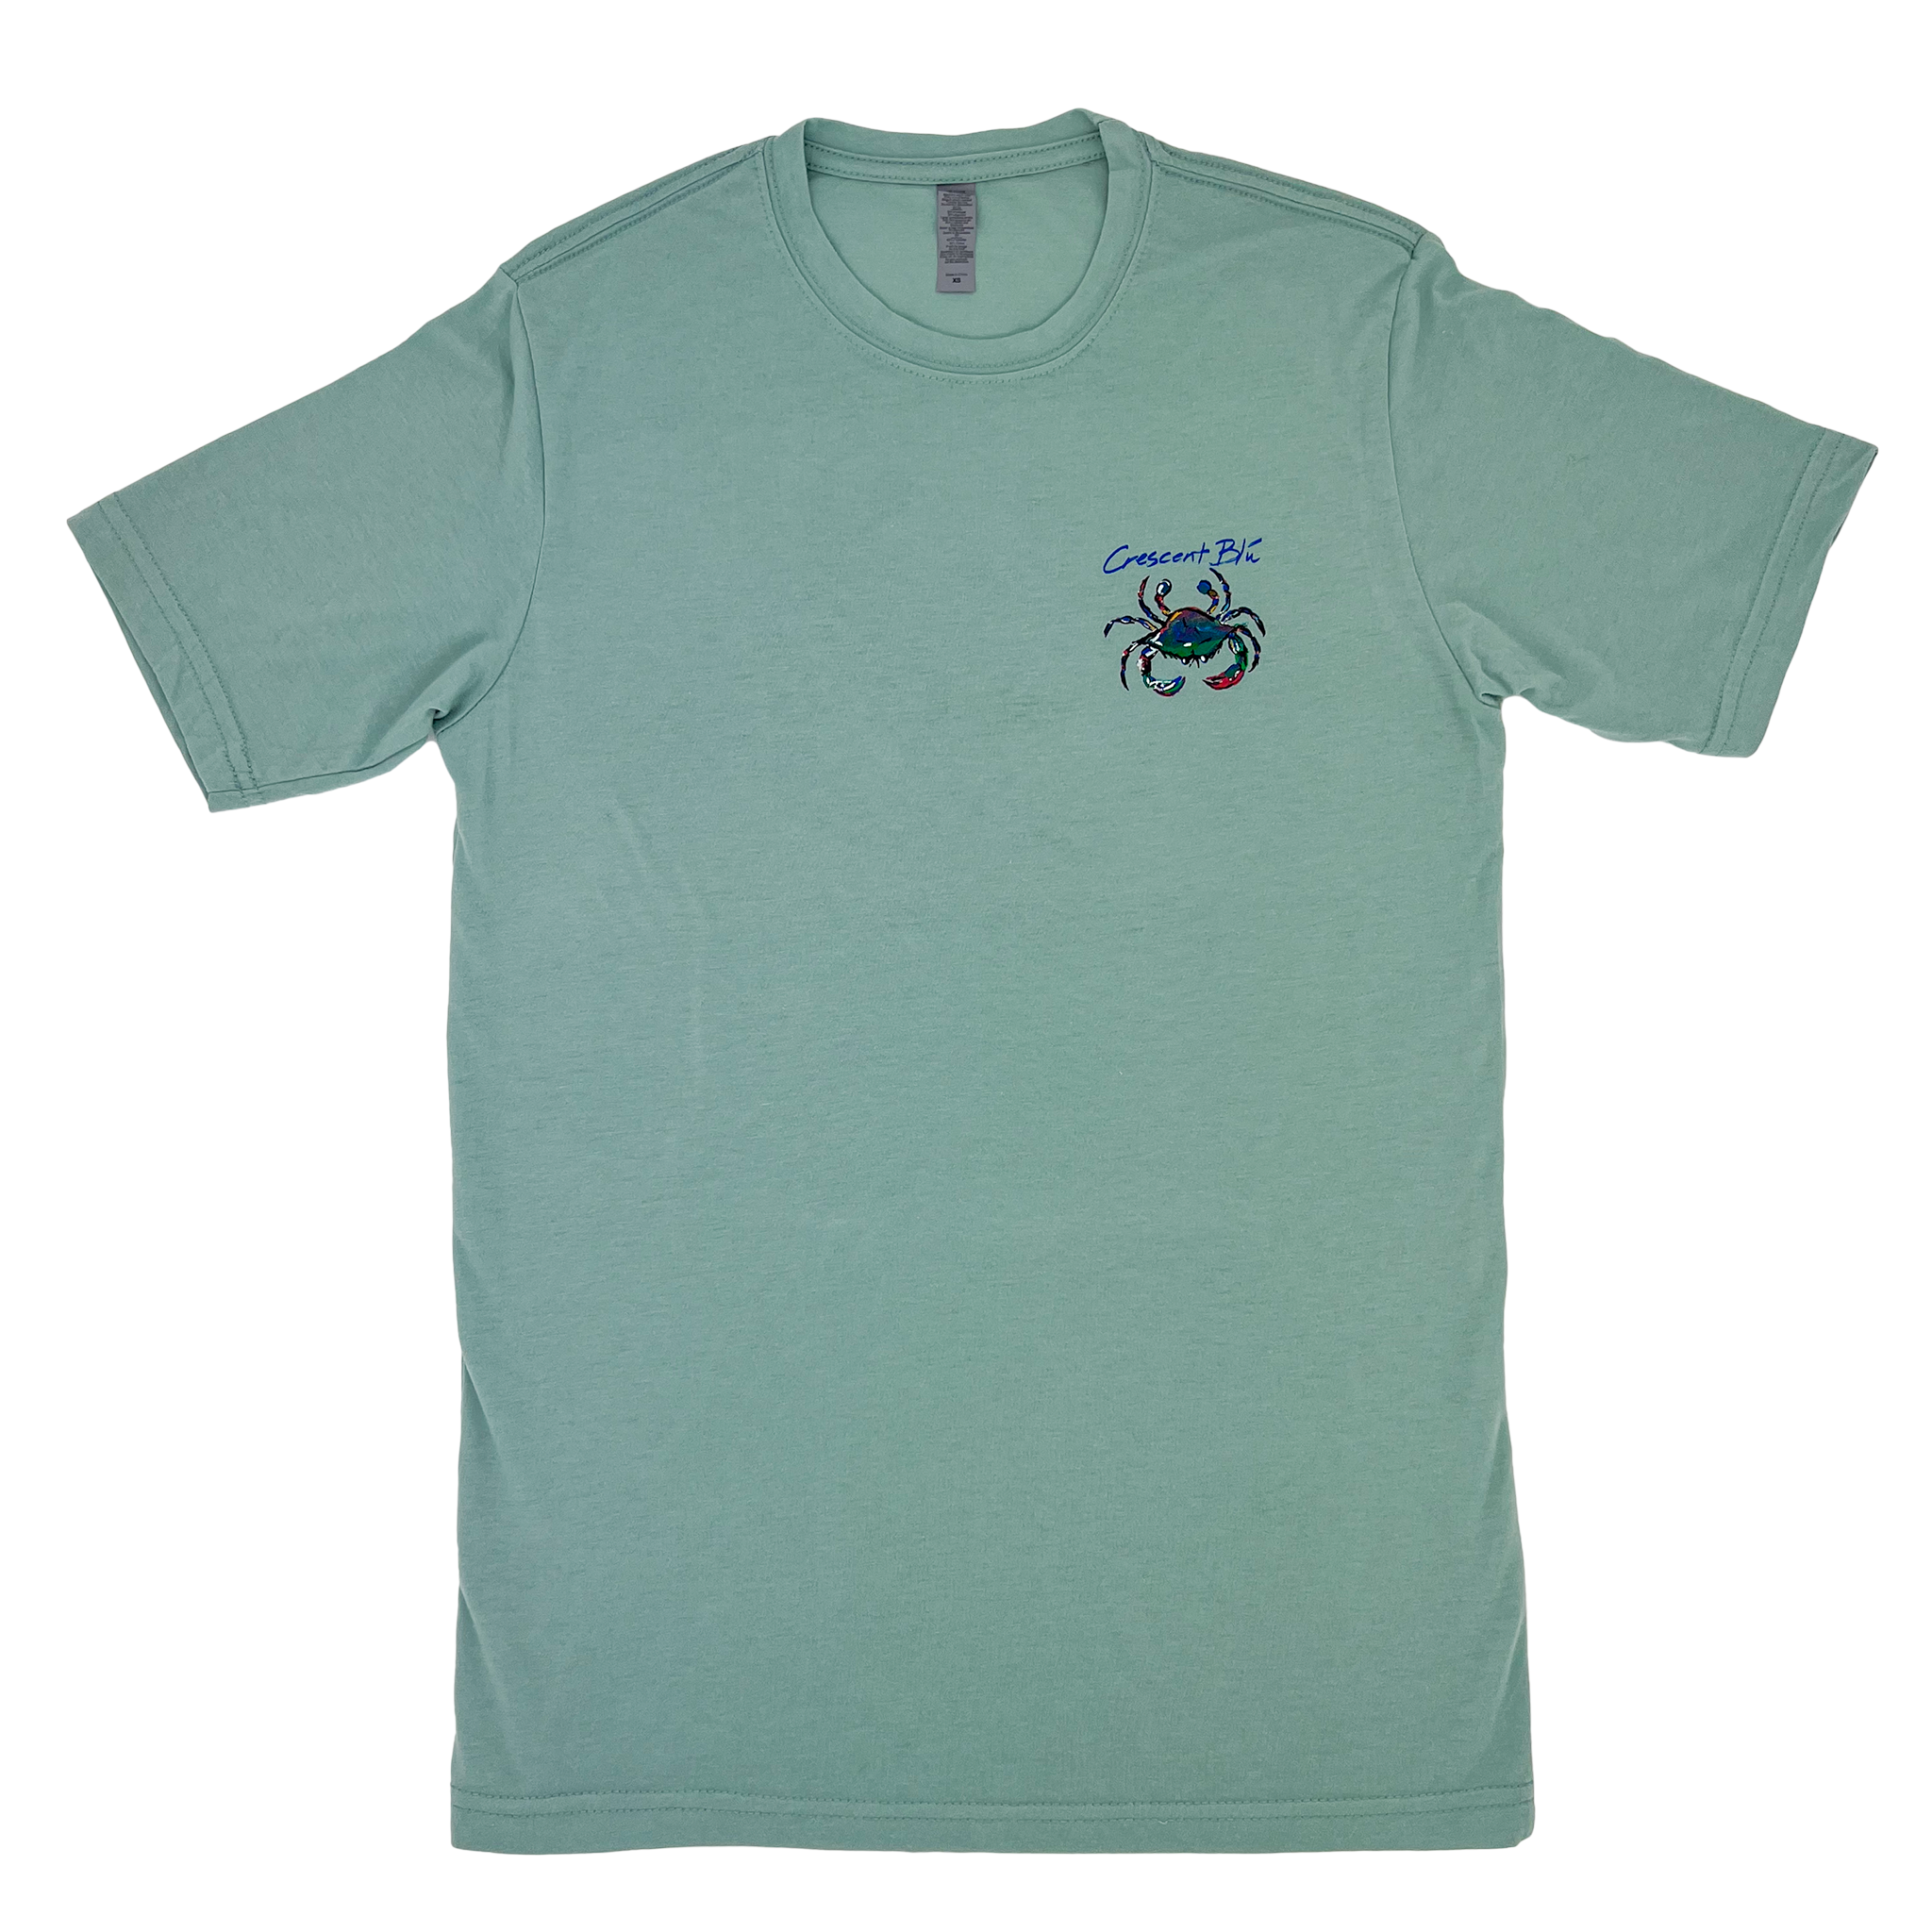 View of front of Stonewashed green adult short sleeve tee with multi-colored Crescent Blu crab logo on front left chest